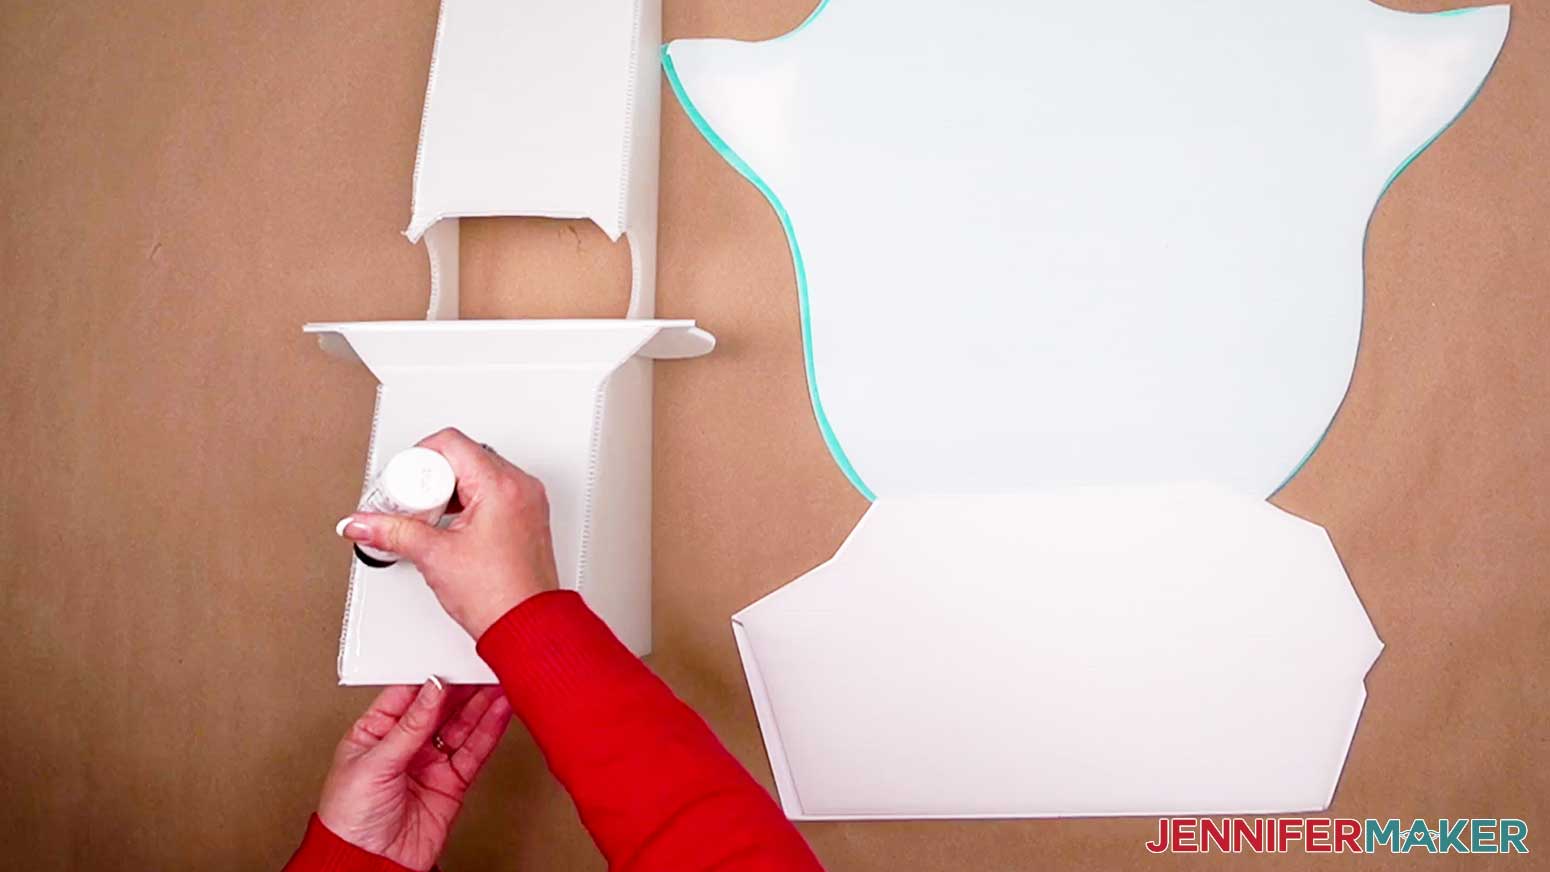 Apply Bearly Art Glue to the back of the stand to be attached to your DIY Cut Out Character.